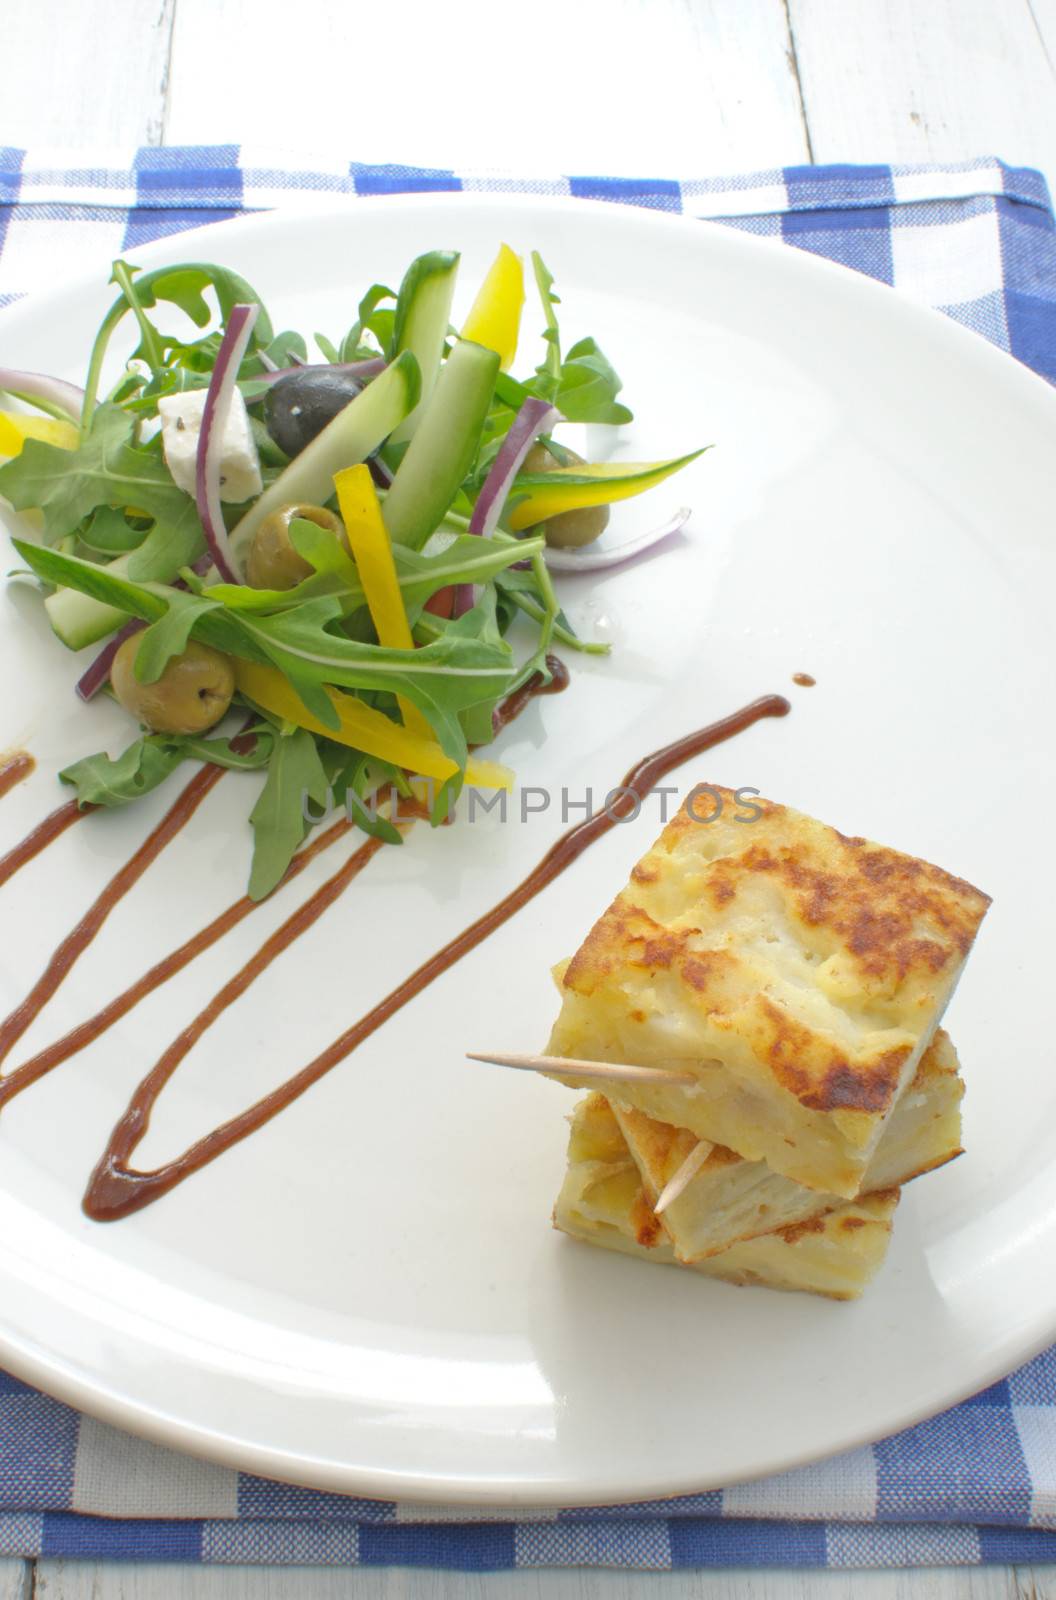 Spanish omelette with salad  by unikpix